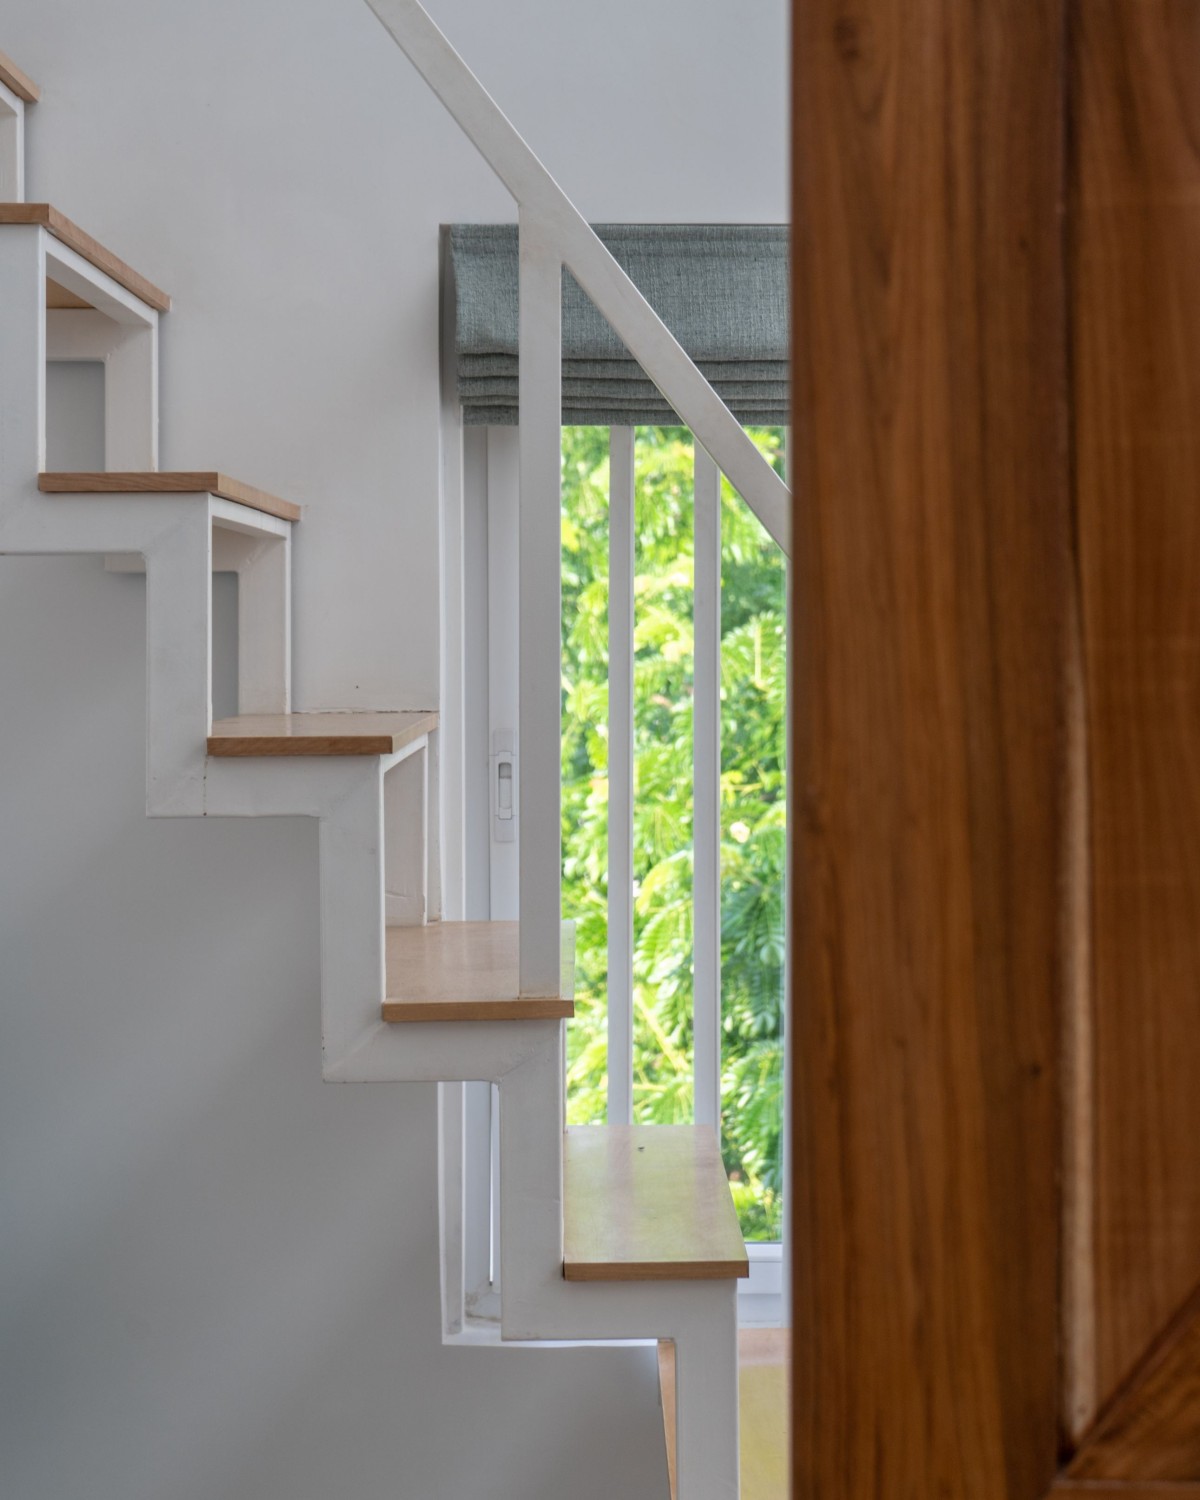 Terrace staircase detail of The Artist’s Loft by Jalihal Associates